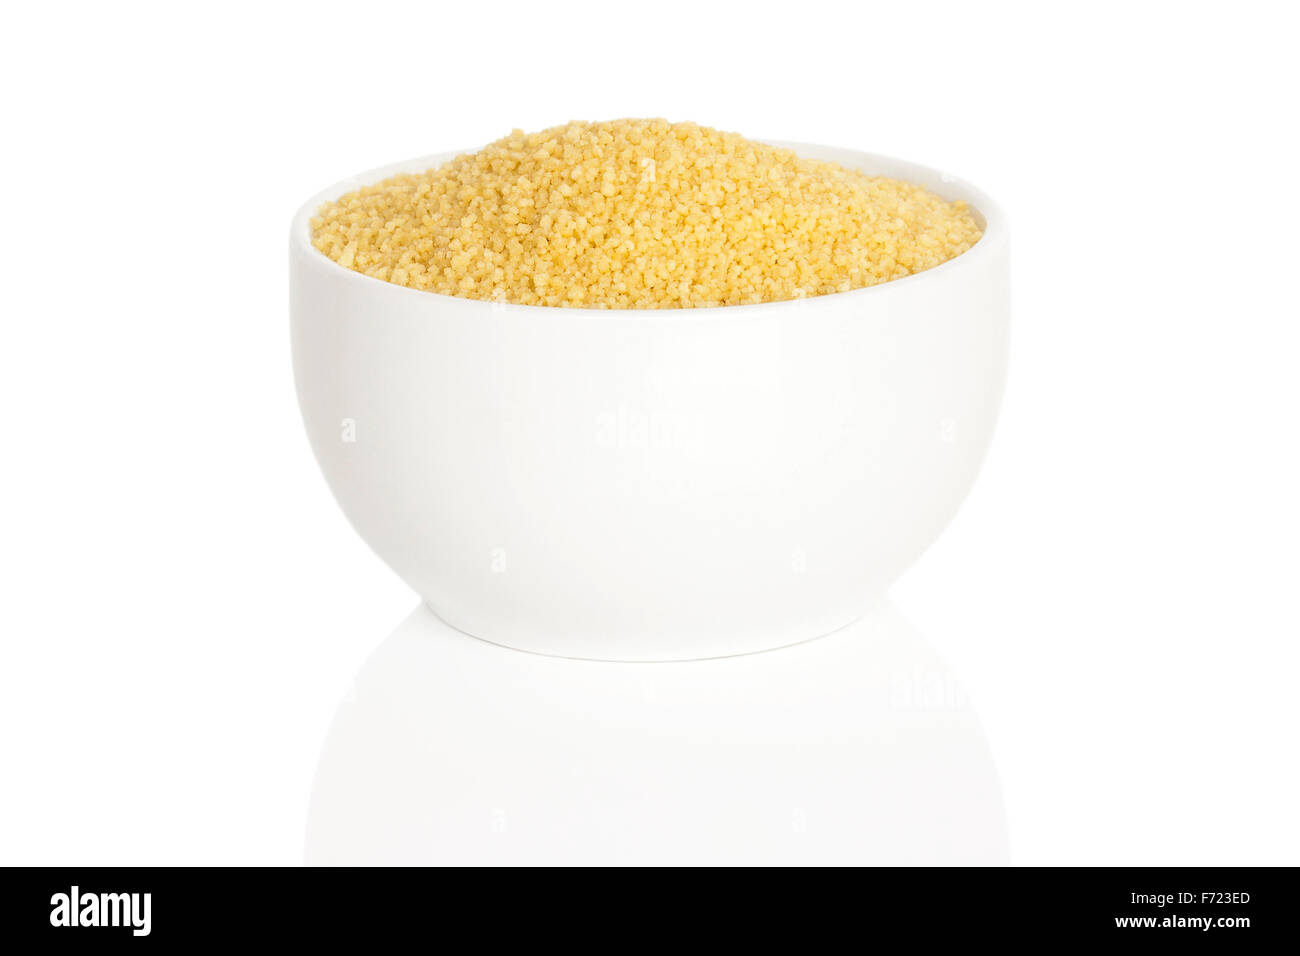 Cous cous in a cup isolated on white background Stock Photo